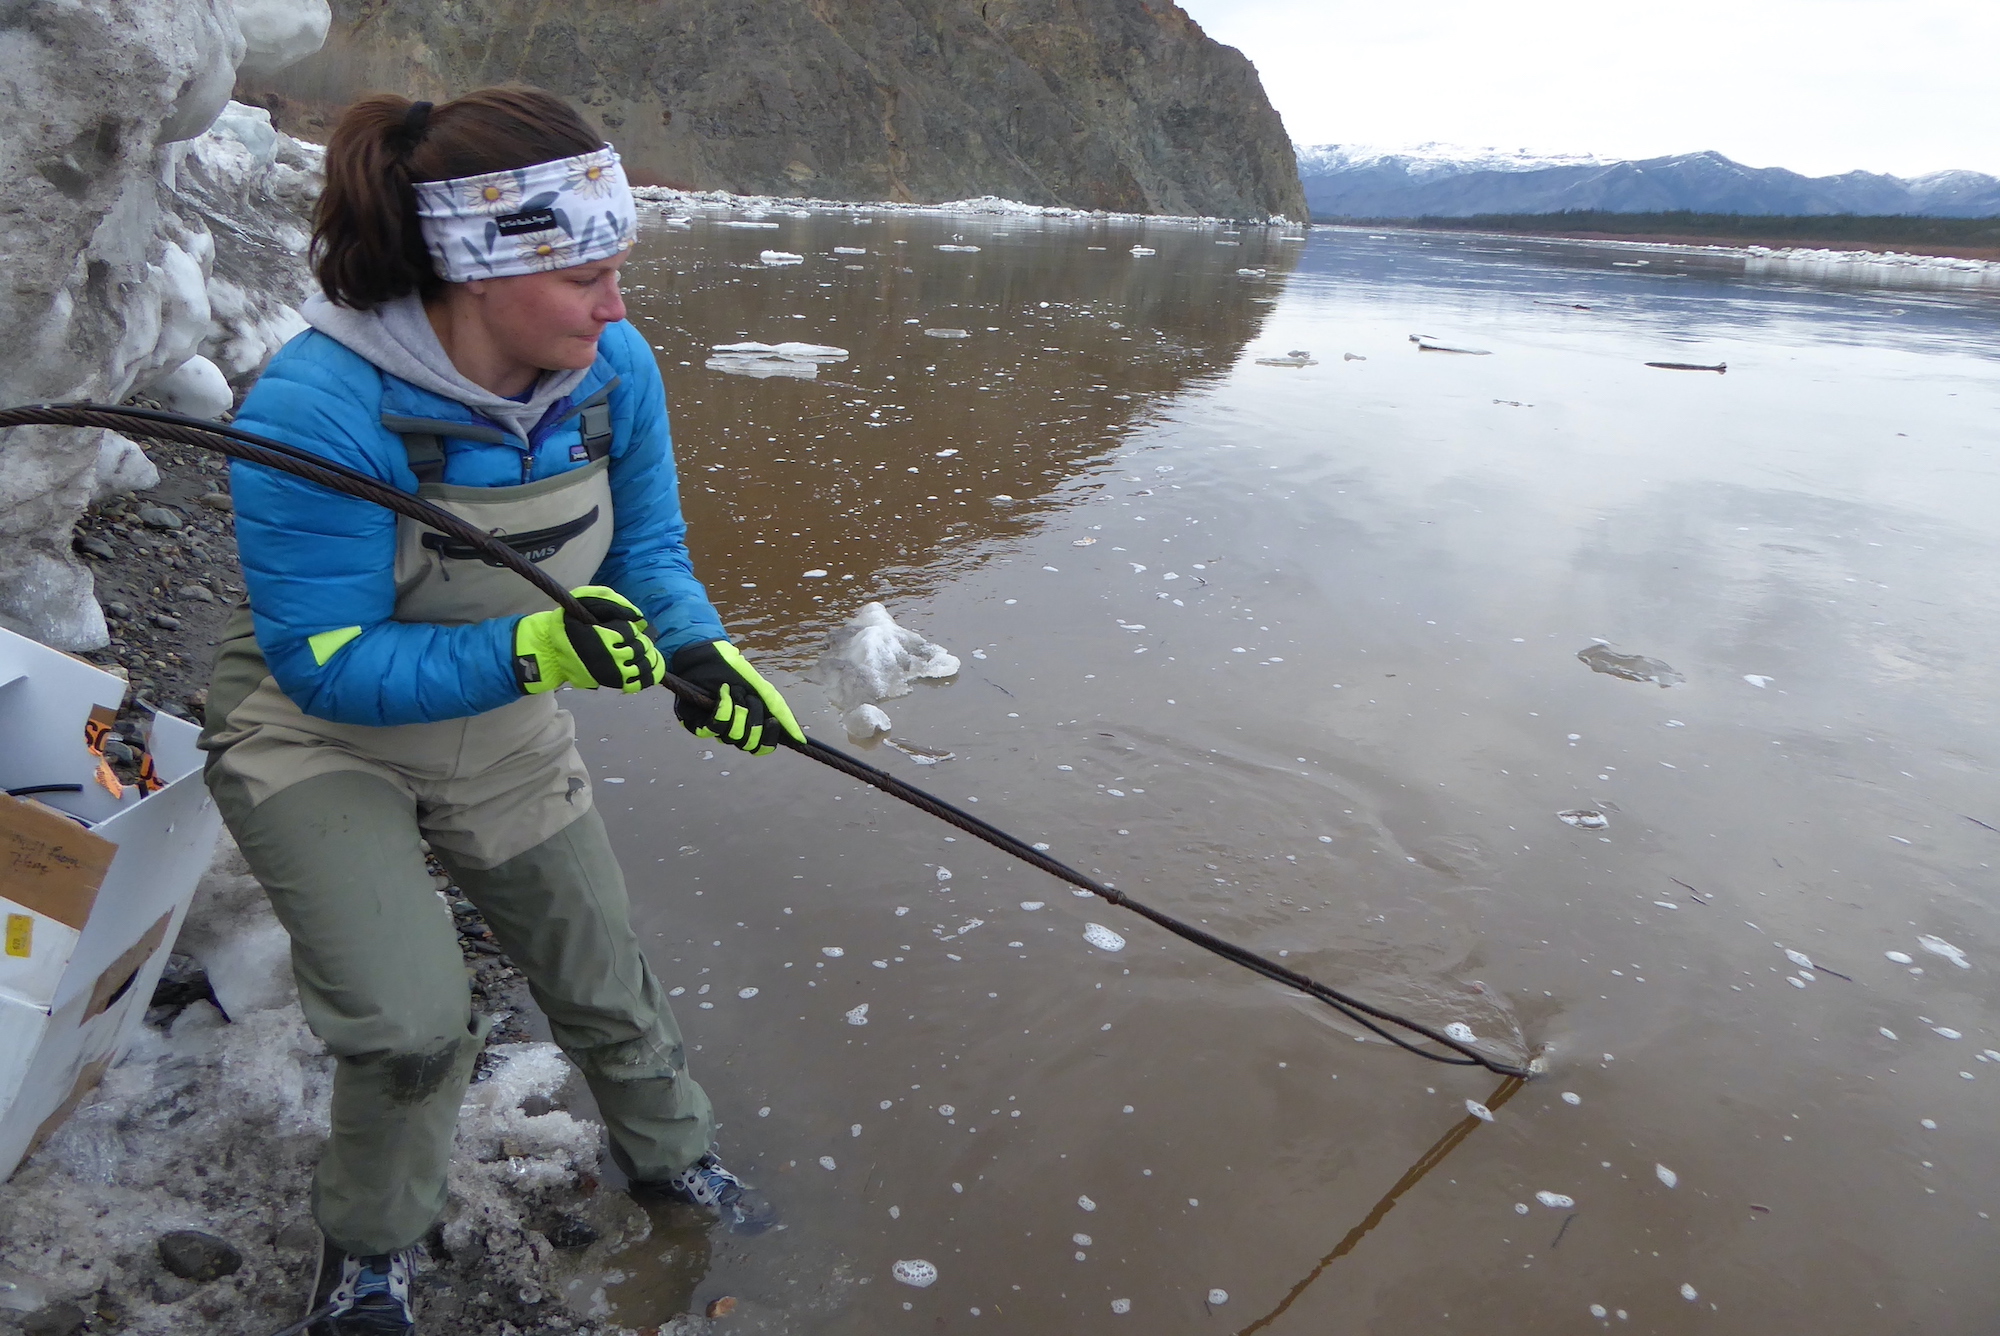 A woman in chest waders pulls a cable from silty river, where chunks of ice float by. In the background are riverbank cliffs and, in the distance, snow-capped mountains.